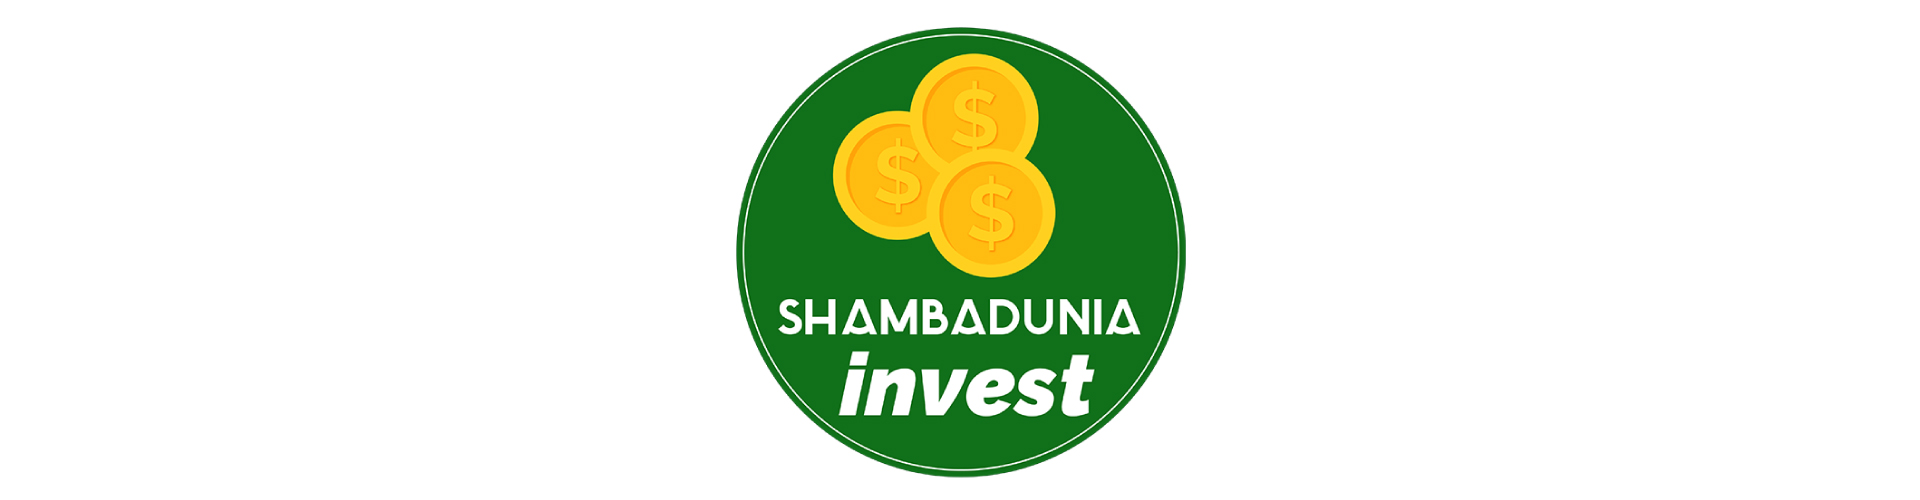 Shamba Dunia Investment Solution (Crowd Funding App)